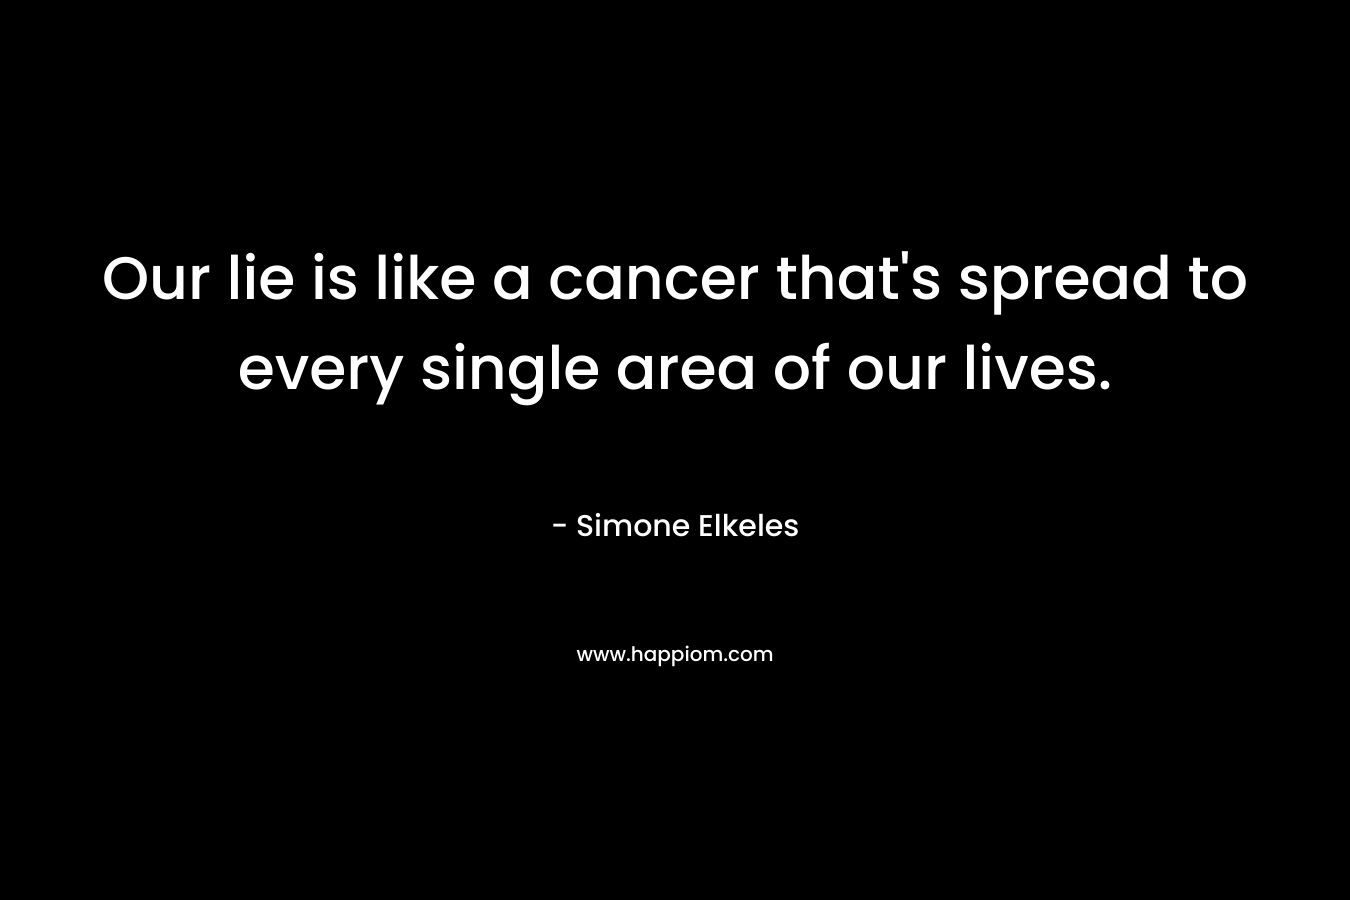 Our lie is like a cancer that's spread to every single area of our lives.